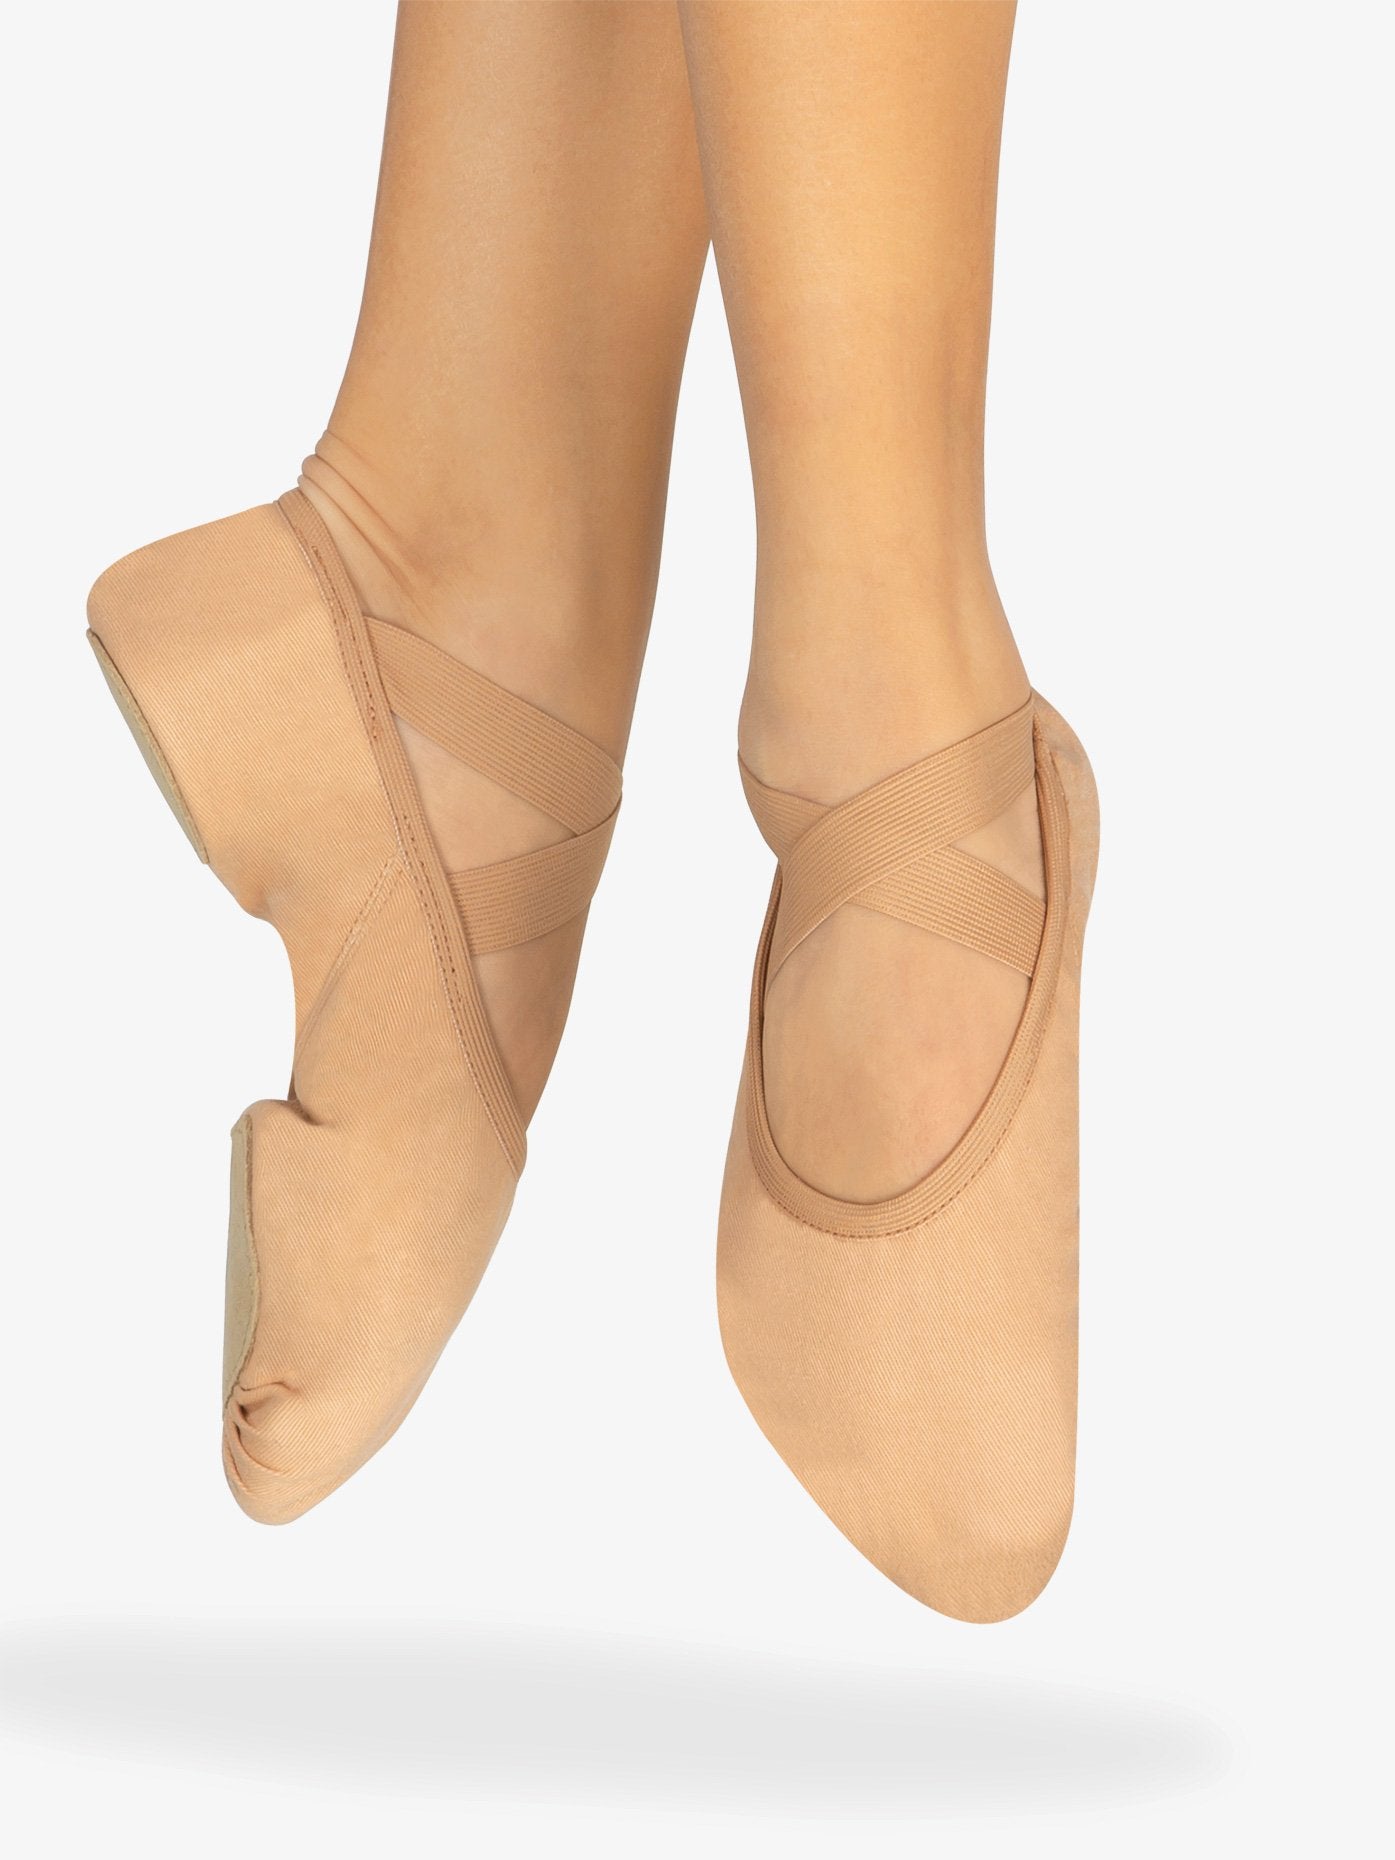 Adult True Bare multi-stretch canvas tan ballet slipper with flexible and supportive design